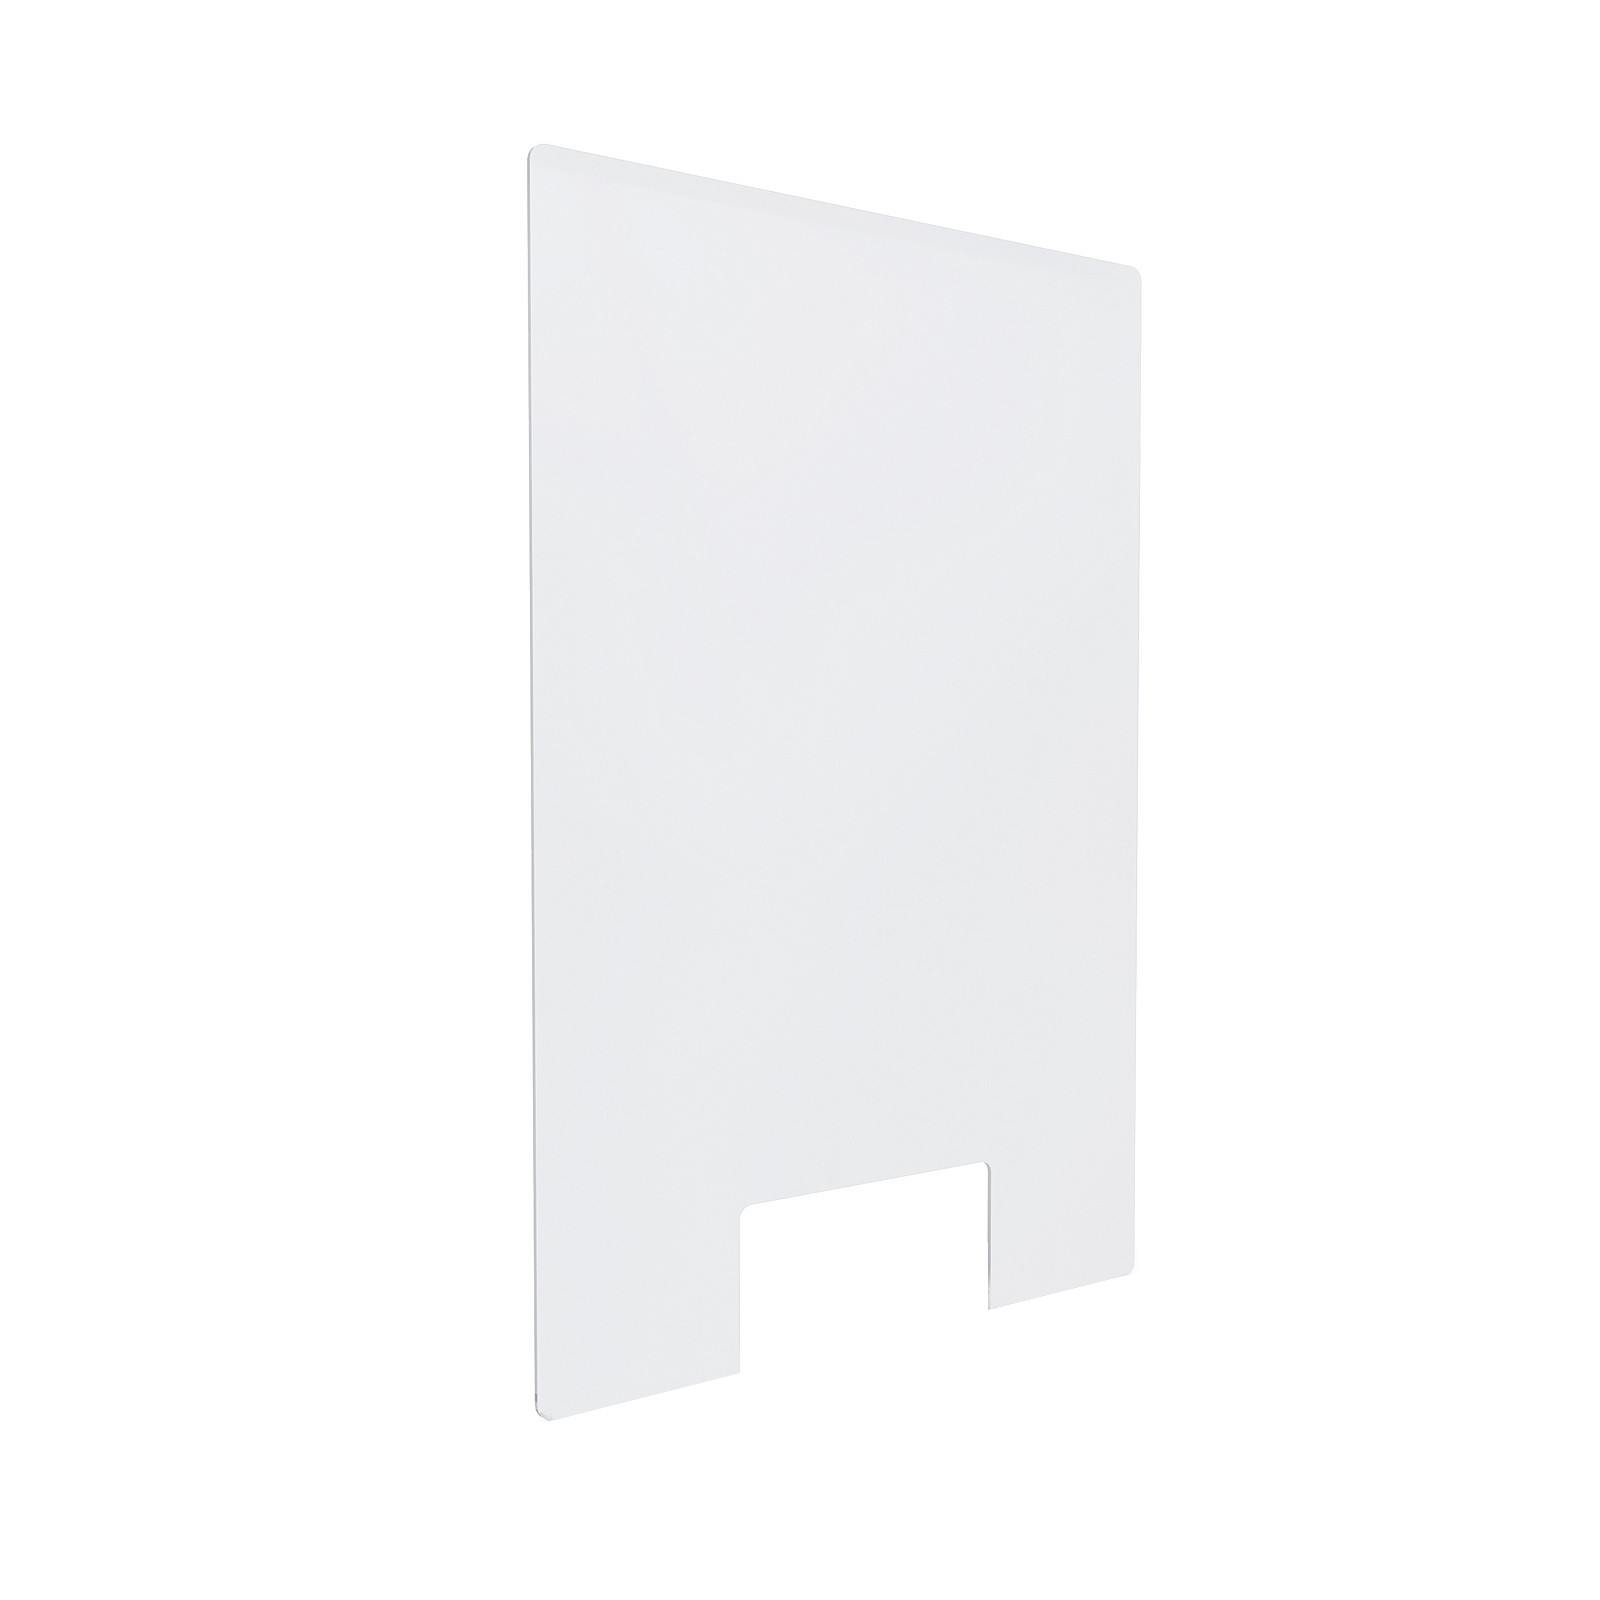 Clear Acrylic Sneeze Guard 35'' Wide x 23-1/2'' Tall (10'' x 5'' Cut Out) x 0.157'' Thickness